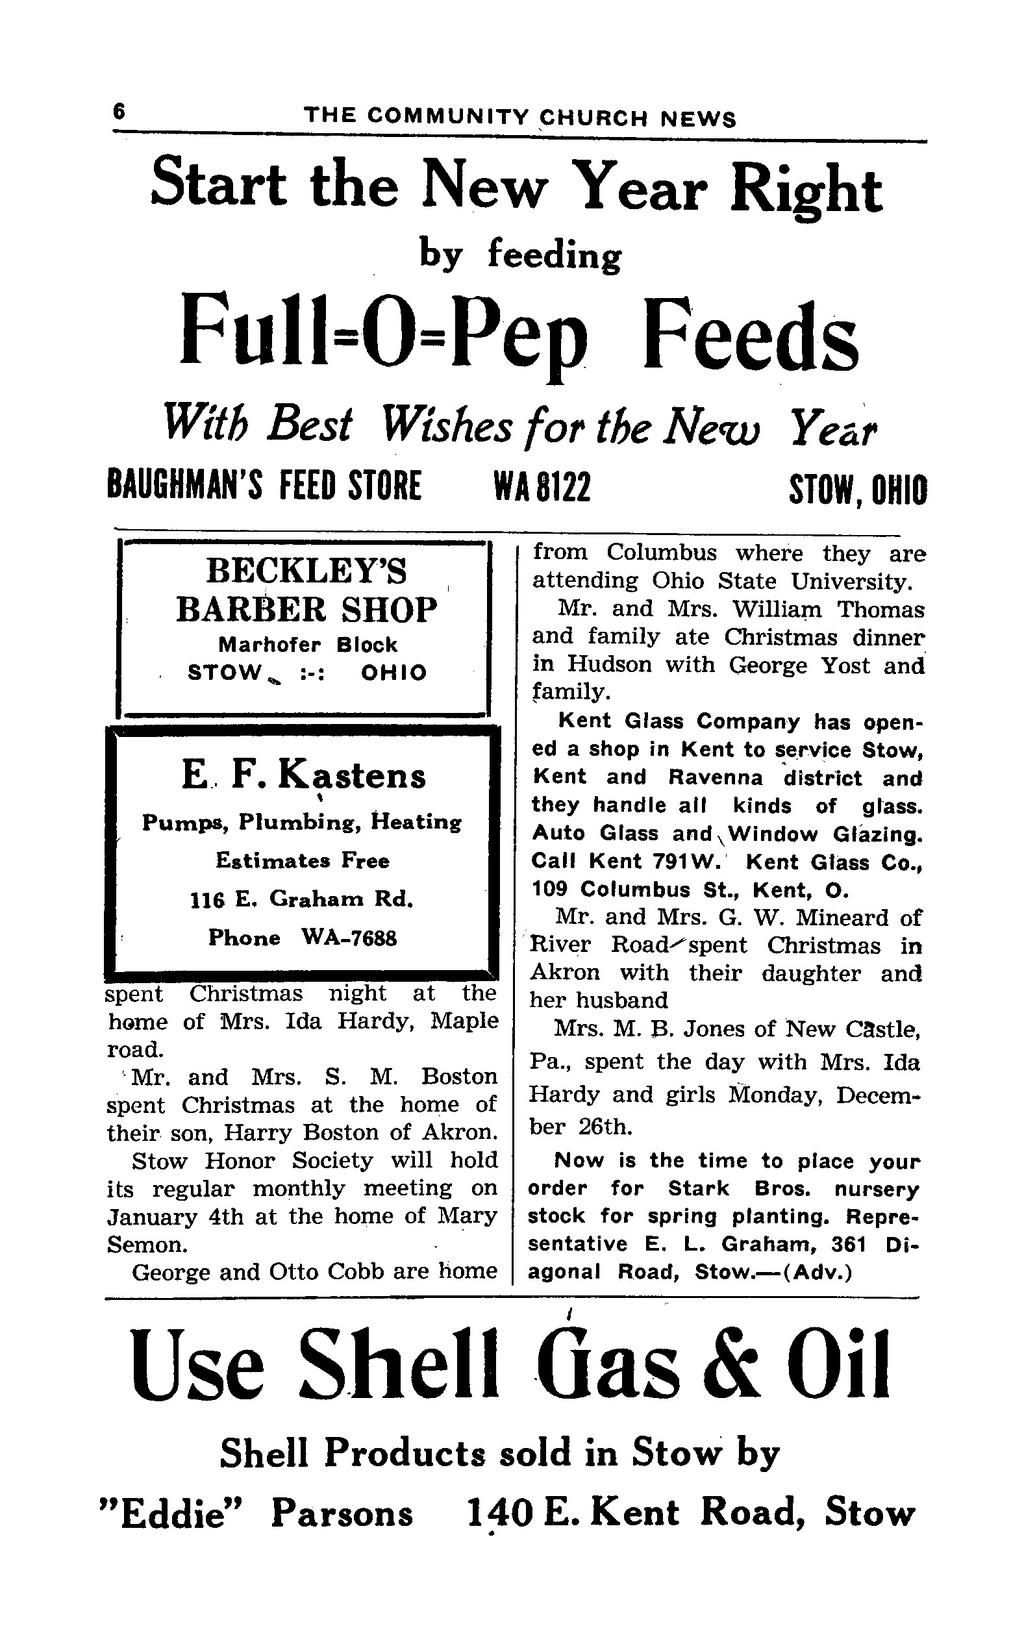 1». THE COMMUNITY CHURCH NEWS Start the New Year Right by feeding Full=OPep Feeds With Best Wishes for the New Year BAUGHMAN'SFEEDSTORE WA 8122 STOW,OHIO BECKLEY'S BARBER SHOP Marhofer Block STOW^